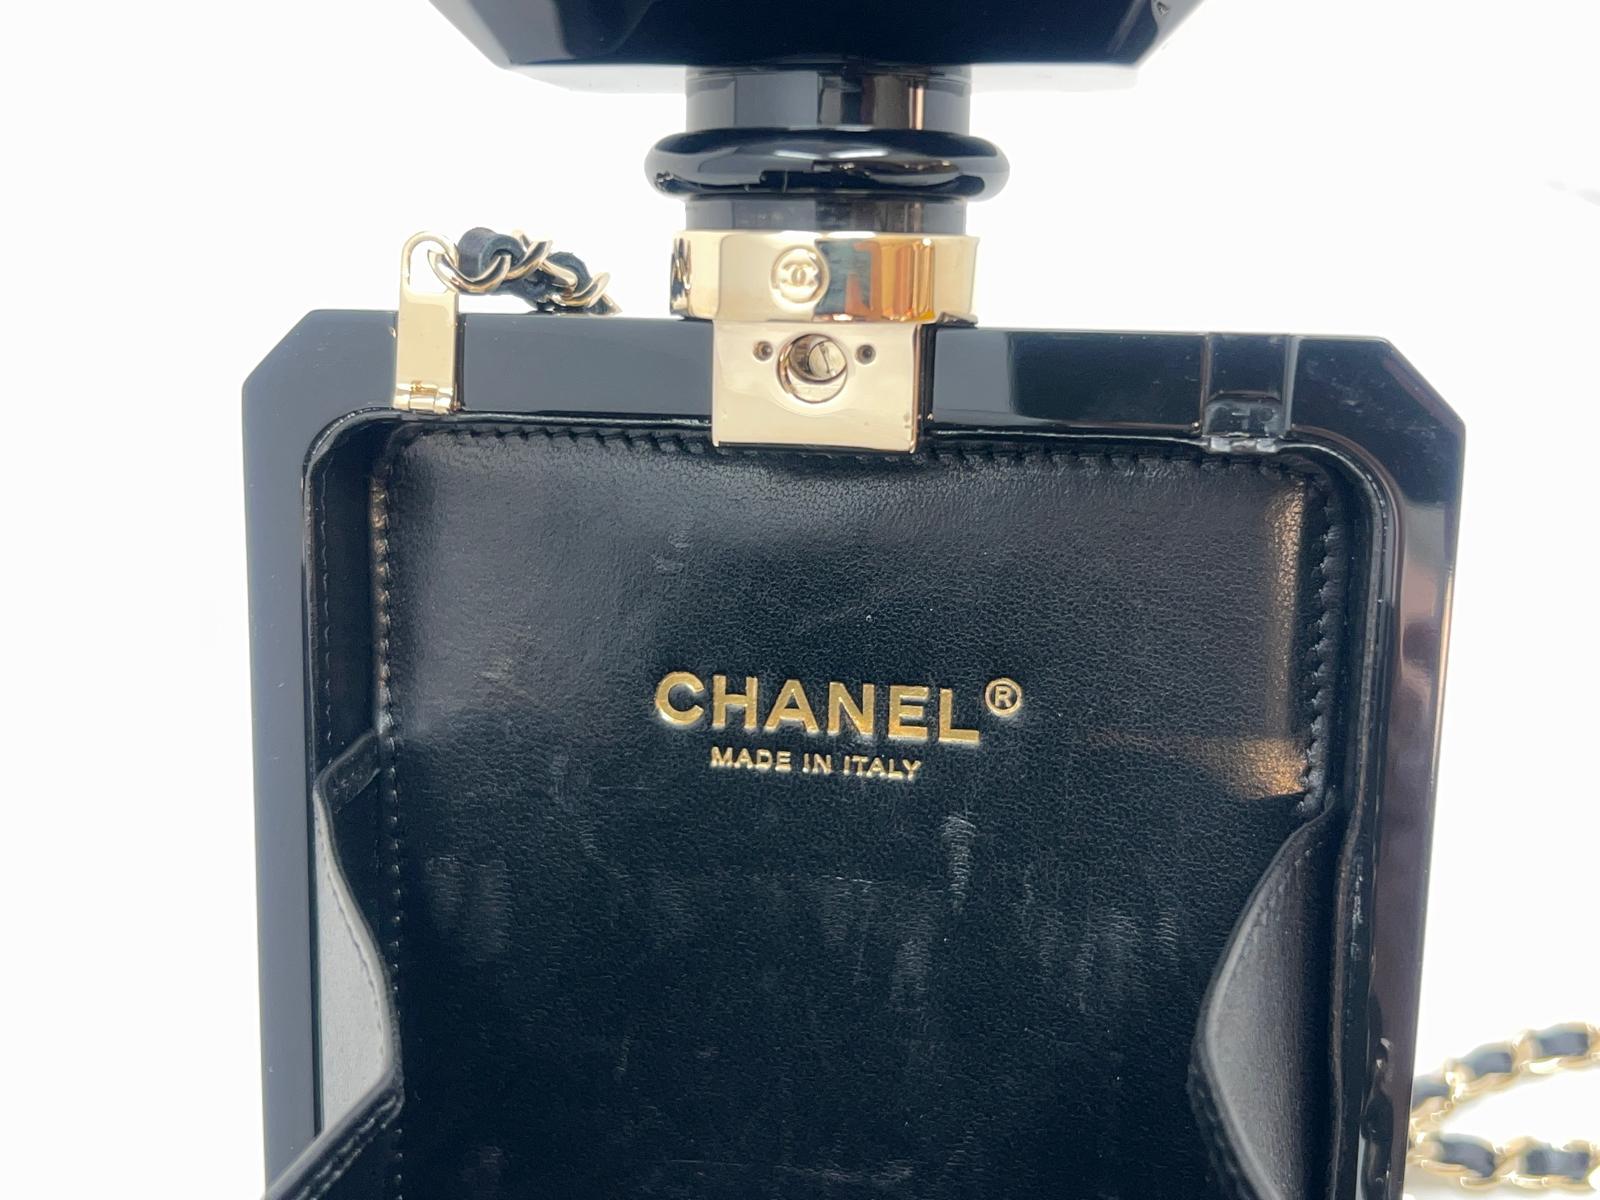 Chanel N5 Black Perfume Bottle Minaudière Cruise Collection 2013  For Sale 5